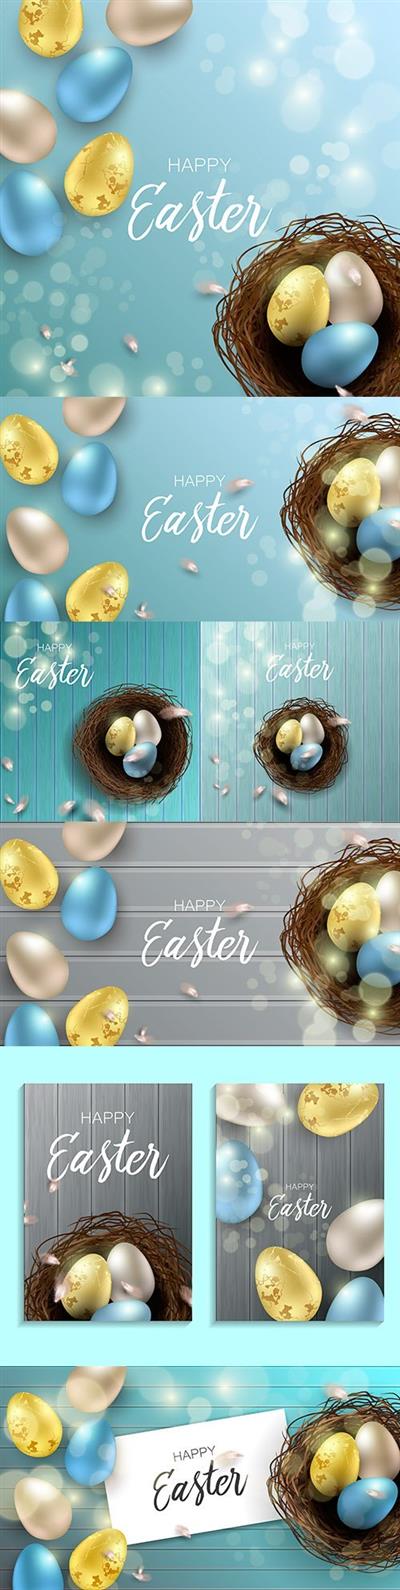 Easter eggs and chicken feathers realistic design